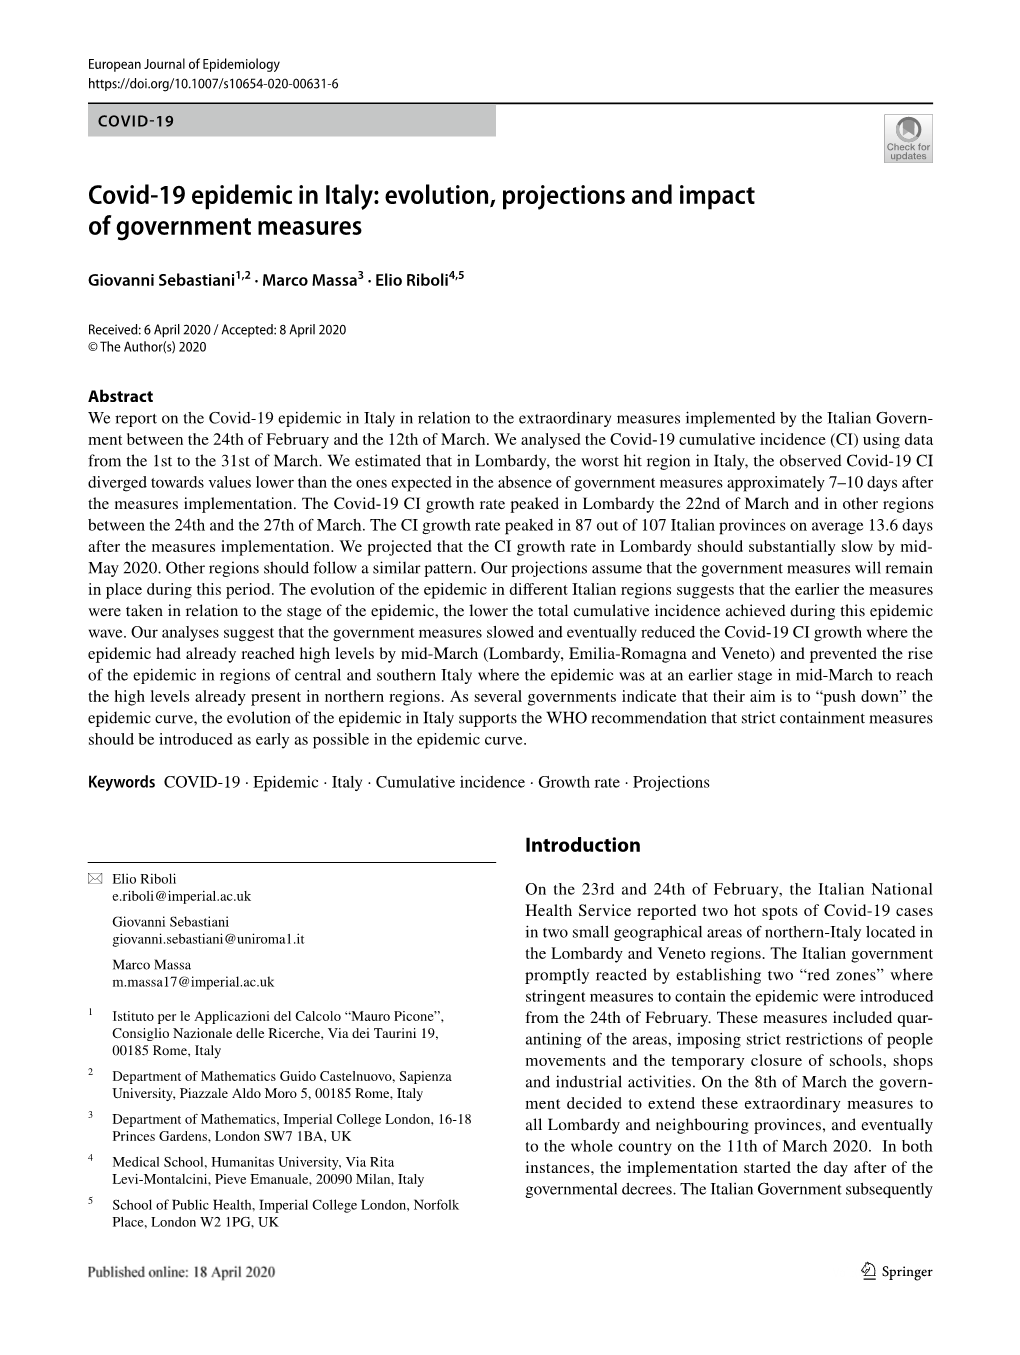 Covid-19 Epidemic in Italy: Evolution, Projections and Impact Of